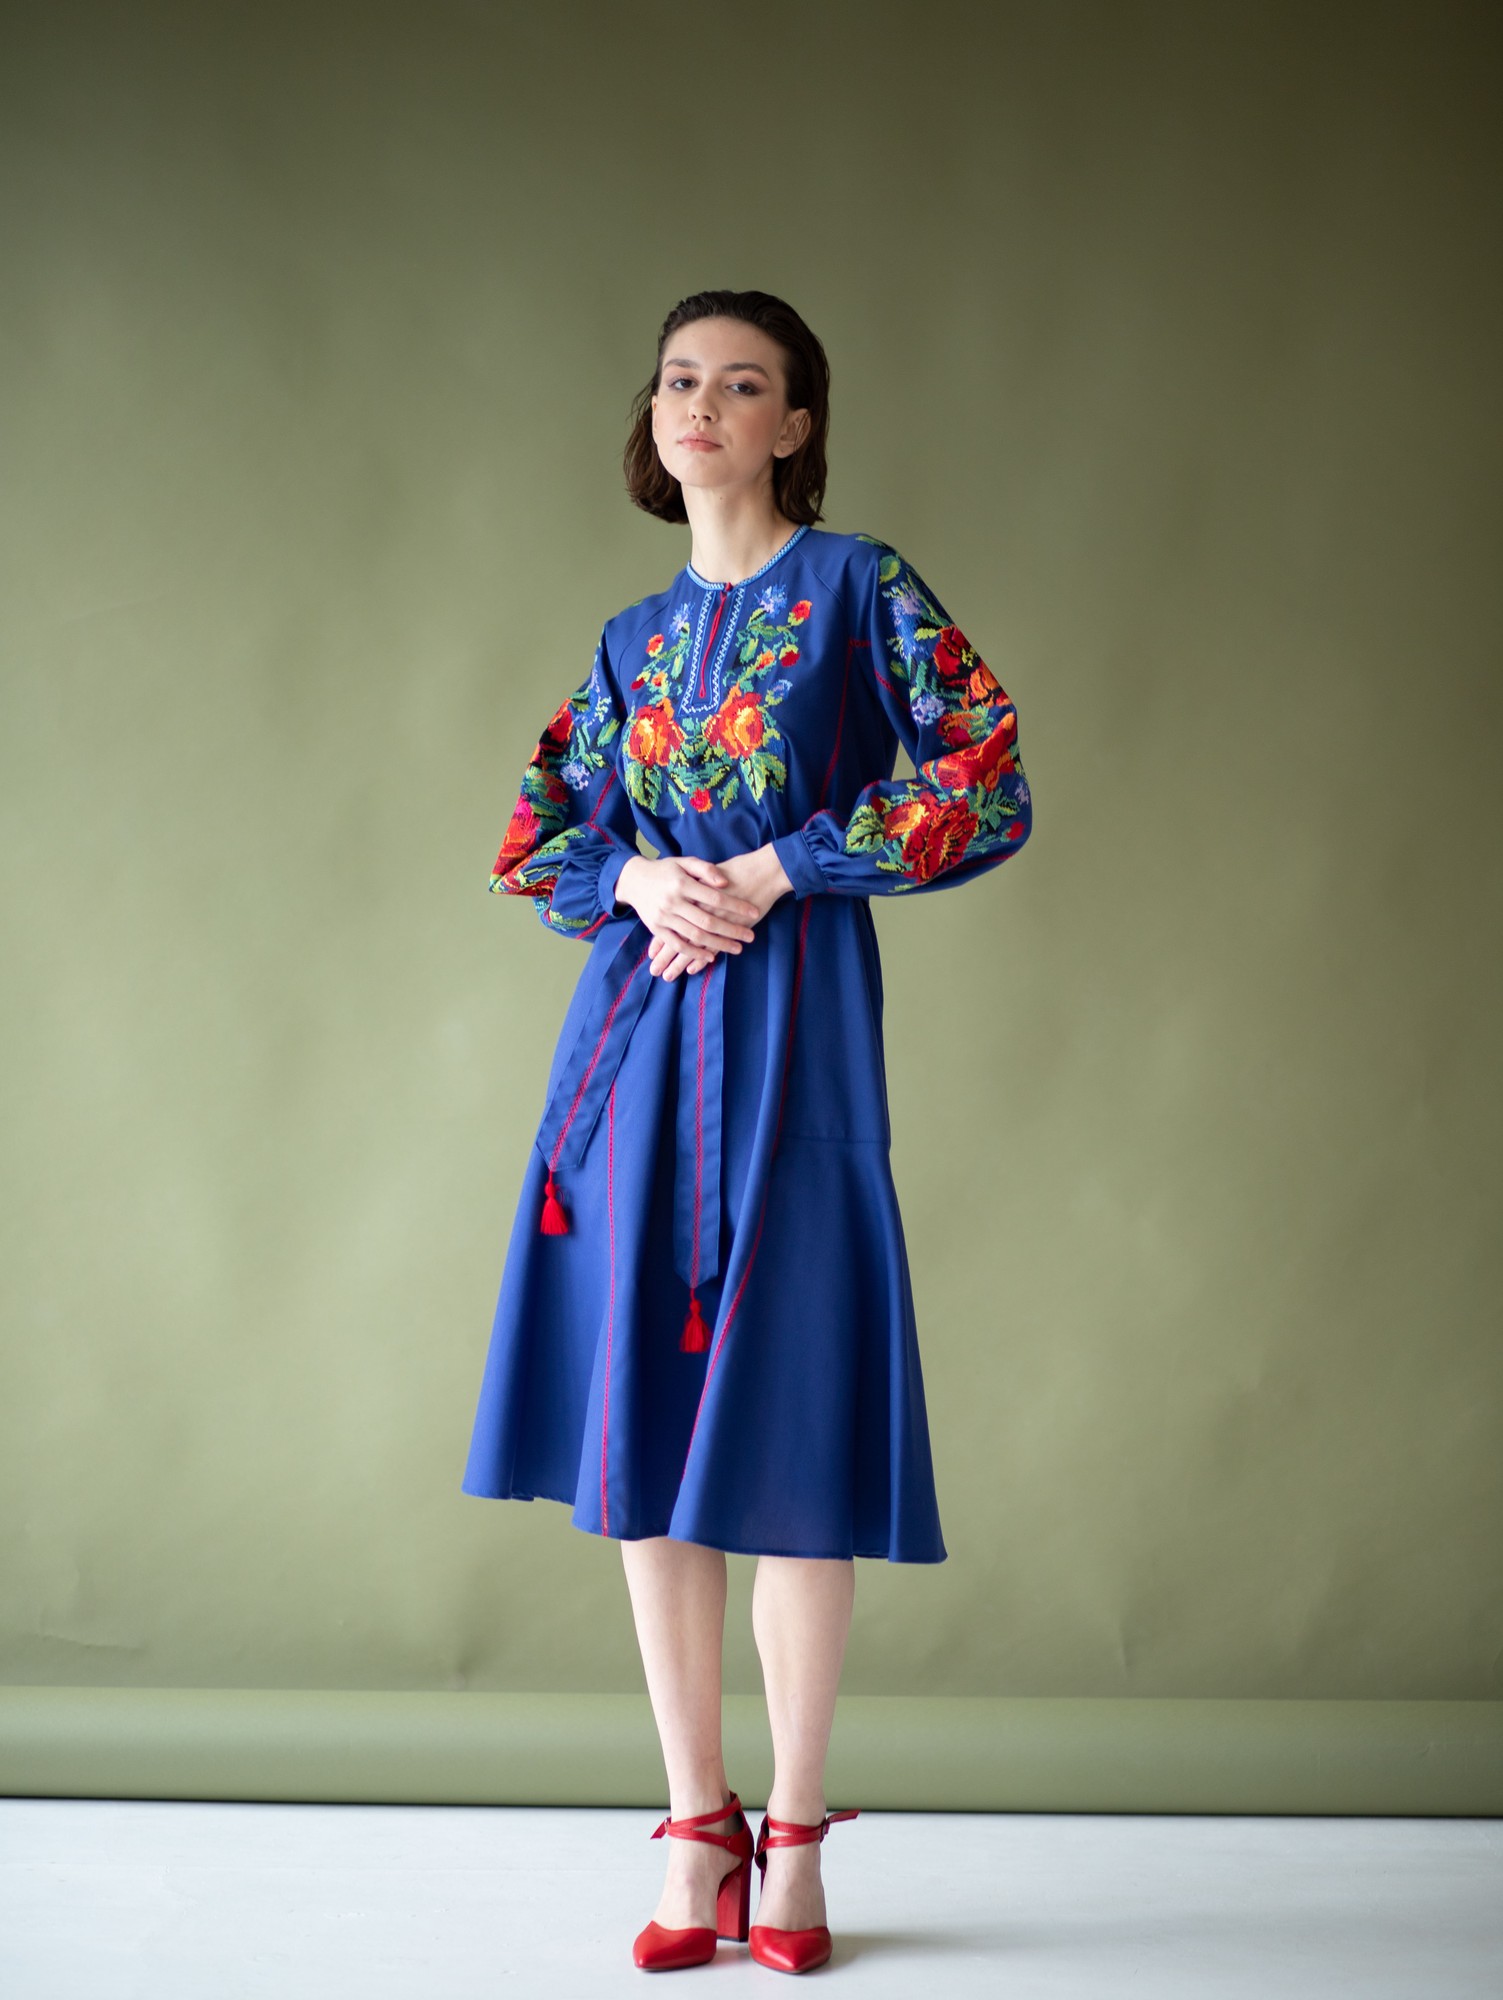 Woman's dress with embroidery 871-18/00